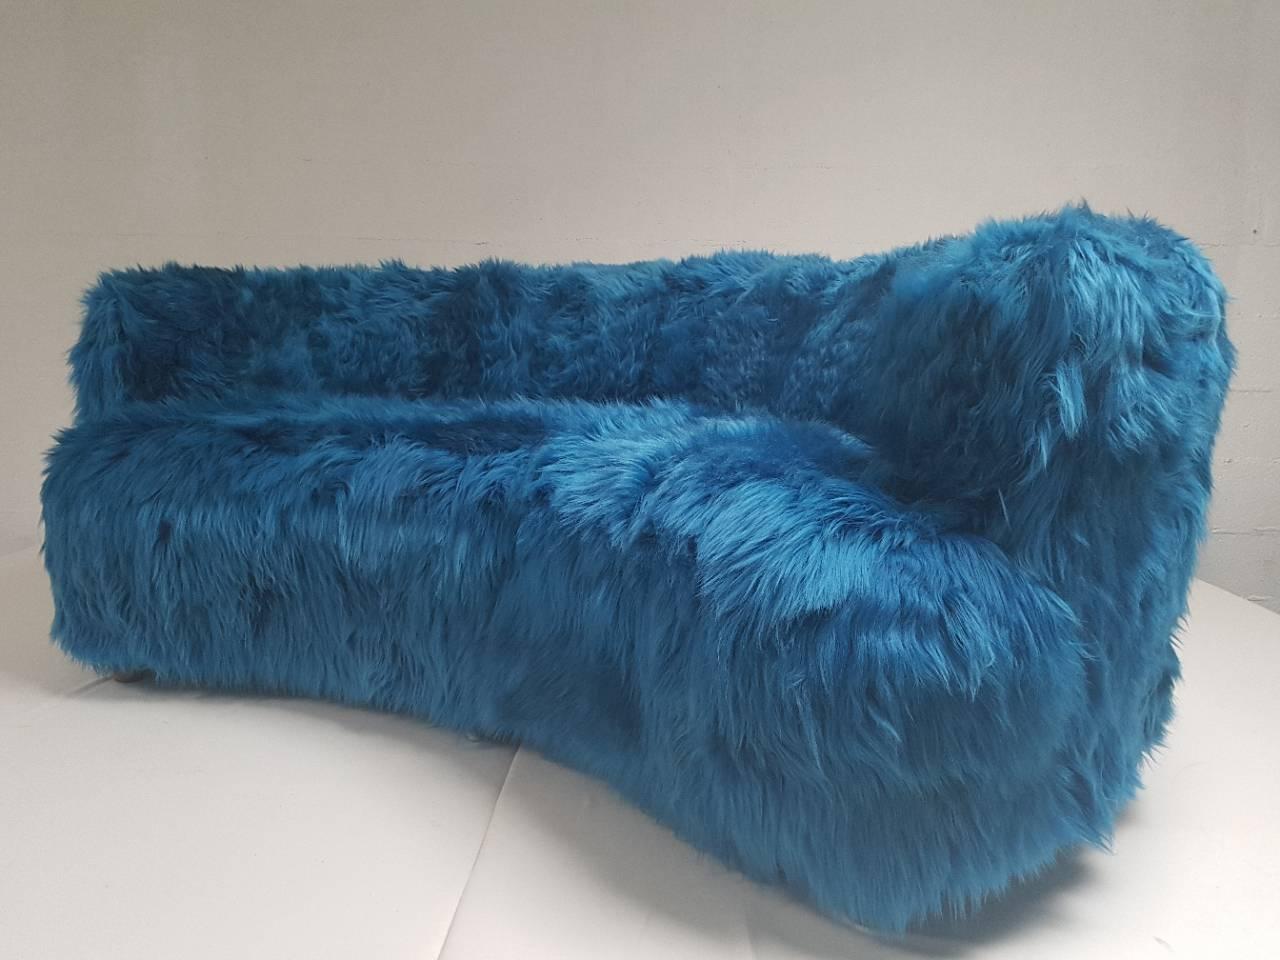 Wonderful vintage Scandinavian sofa with blue sheepskin upholstery, circa 1900.
This blue color brings a spicy touch of modernity.

 